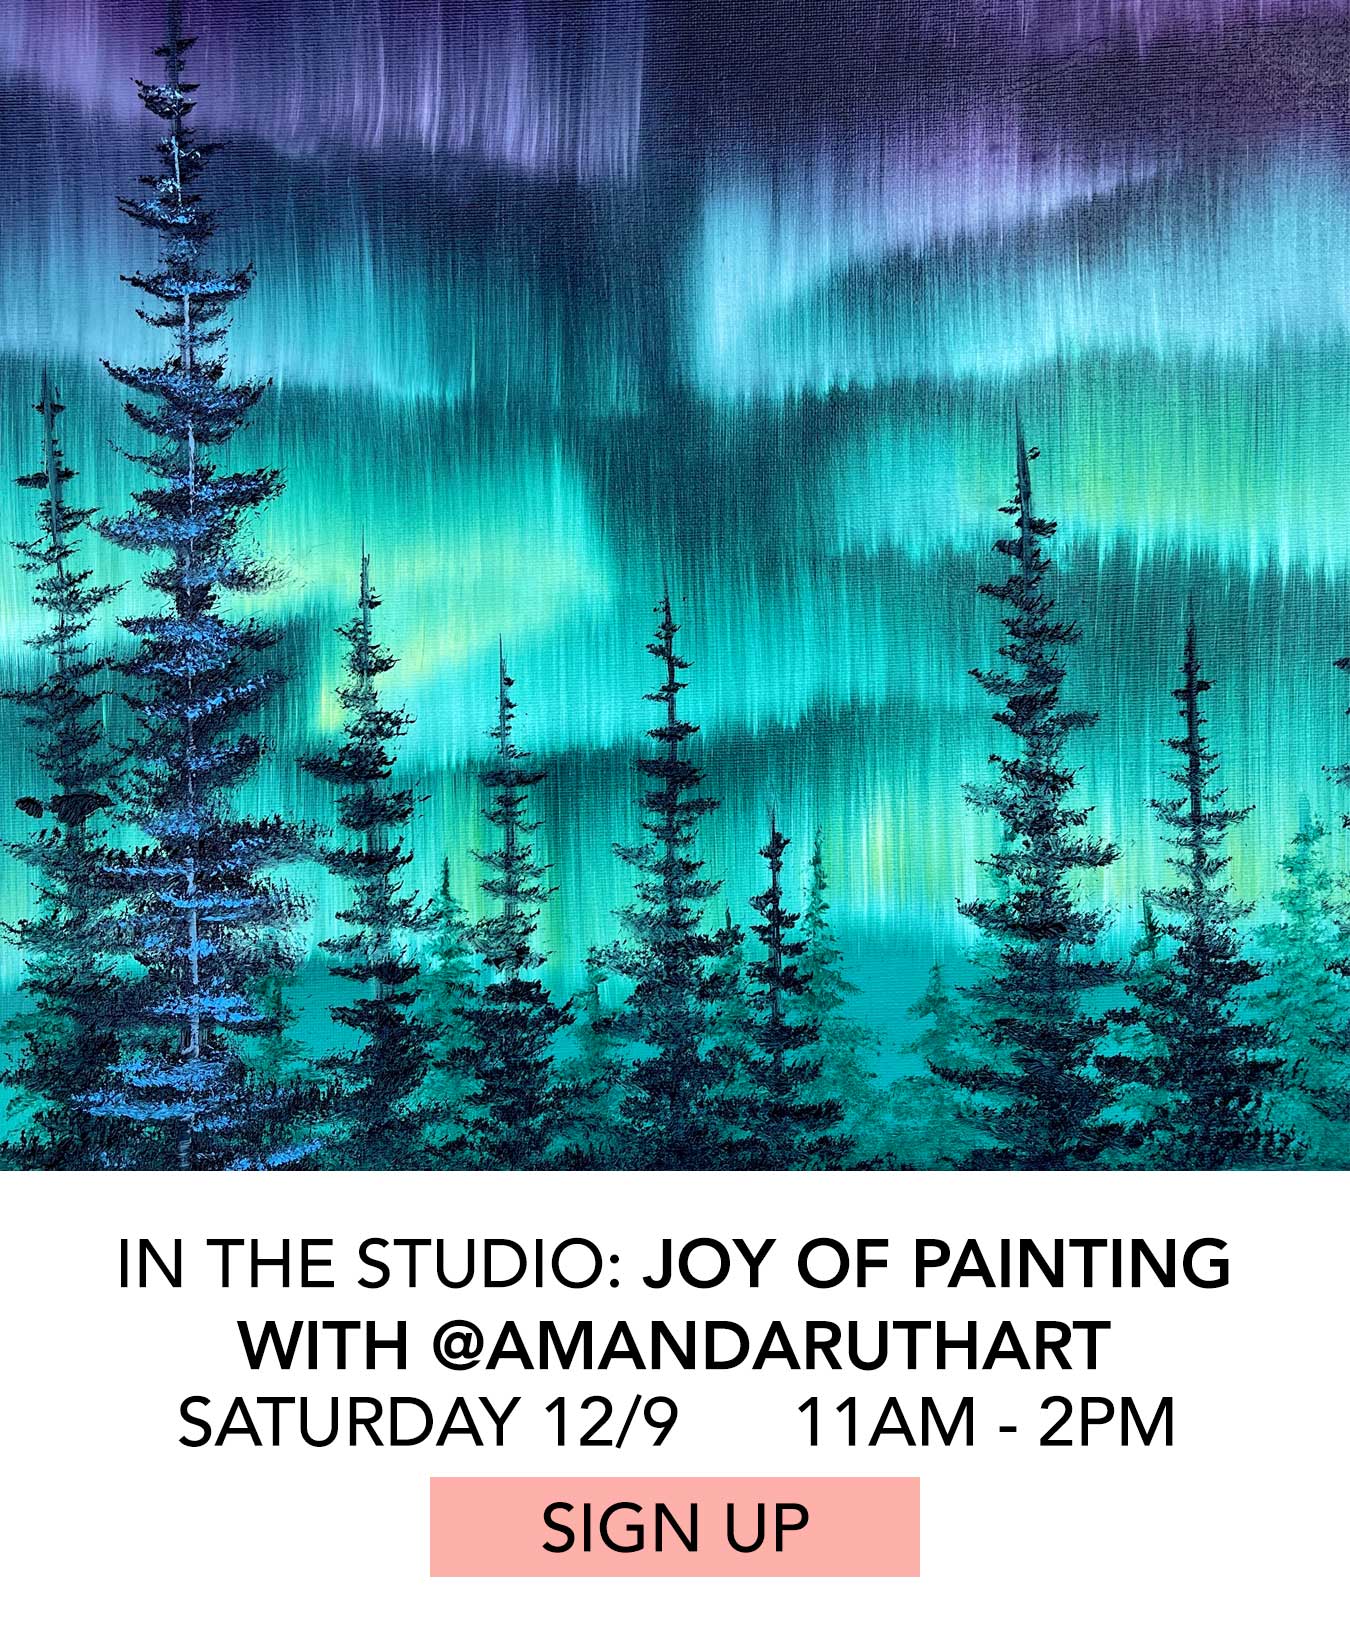 In the Studio: Joy of Painting with @AmandaRuthArt. Saturday 12/9 from 11am to 2pm. Click to Sign Up.